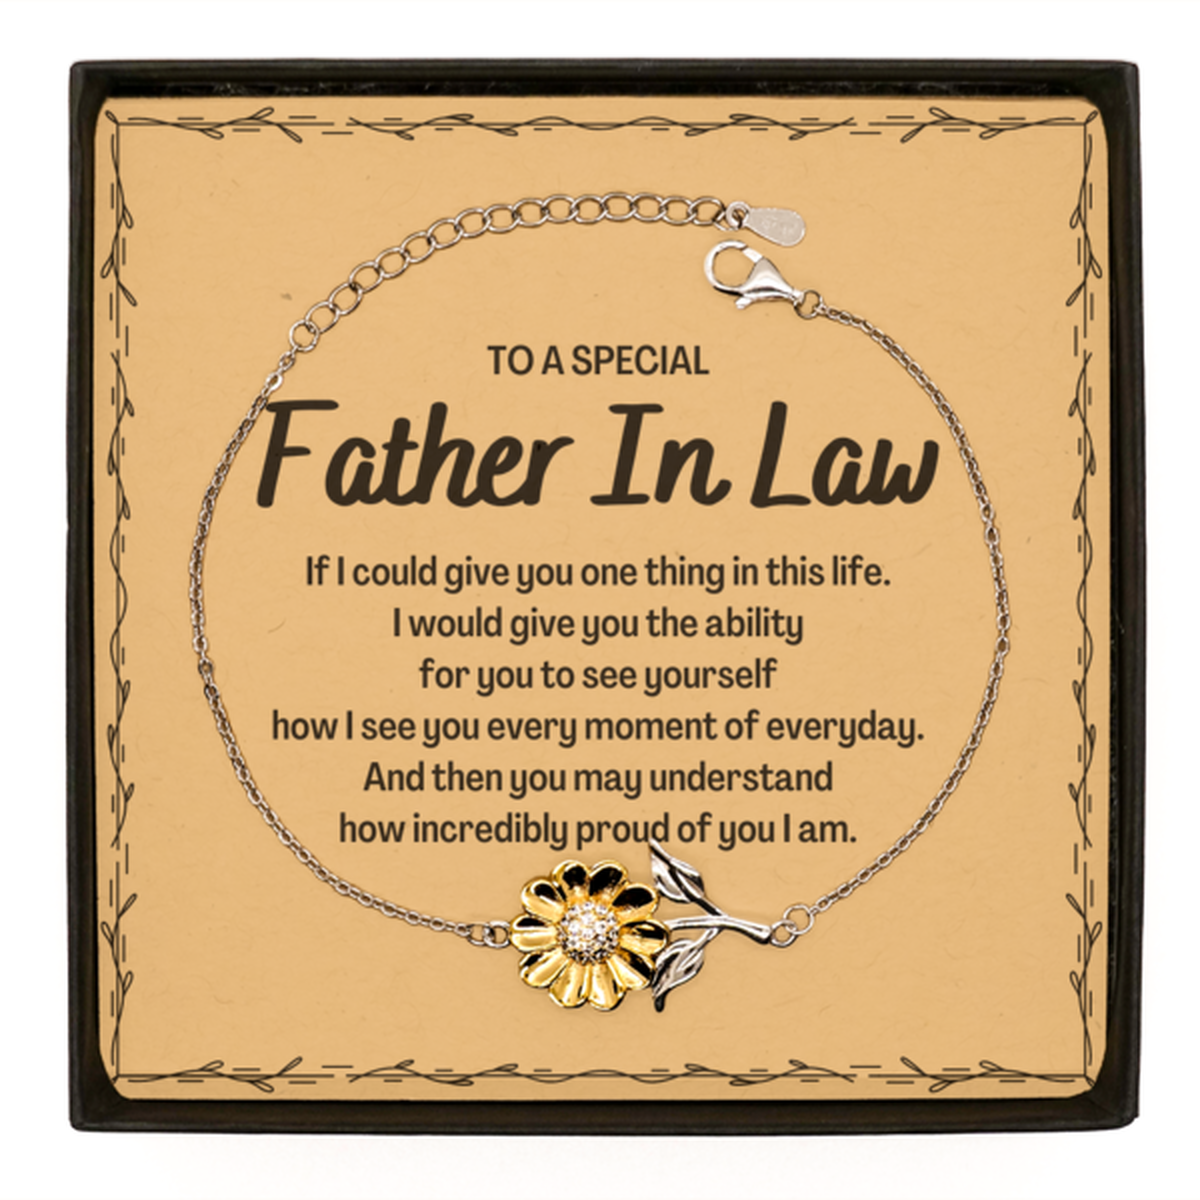 To My Father In Law Sunflower Bracelet, Gifts For Father In Law Message Card, Inspirational Gifts for Christmas Birthday, Epic Gifts for Father In Law To A Special Father In Law how incredibly proud of you I am